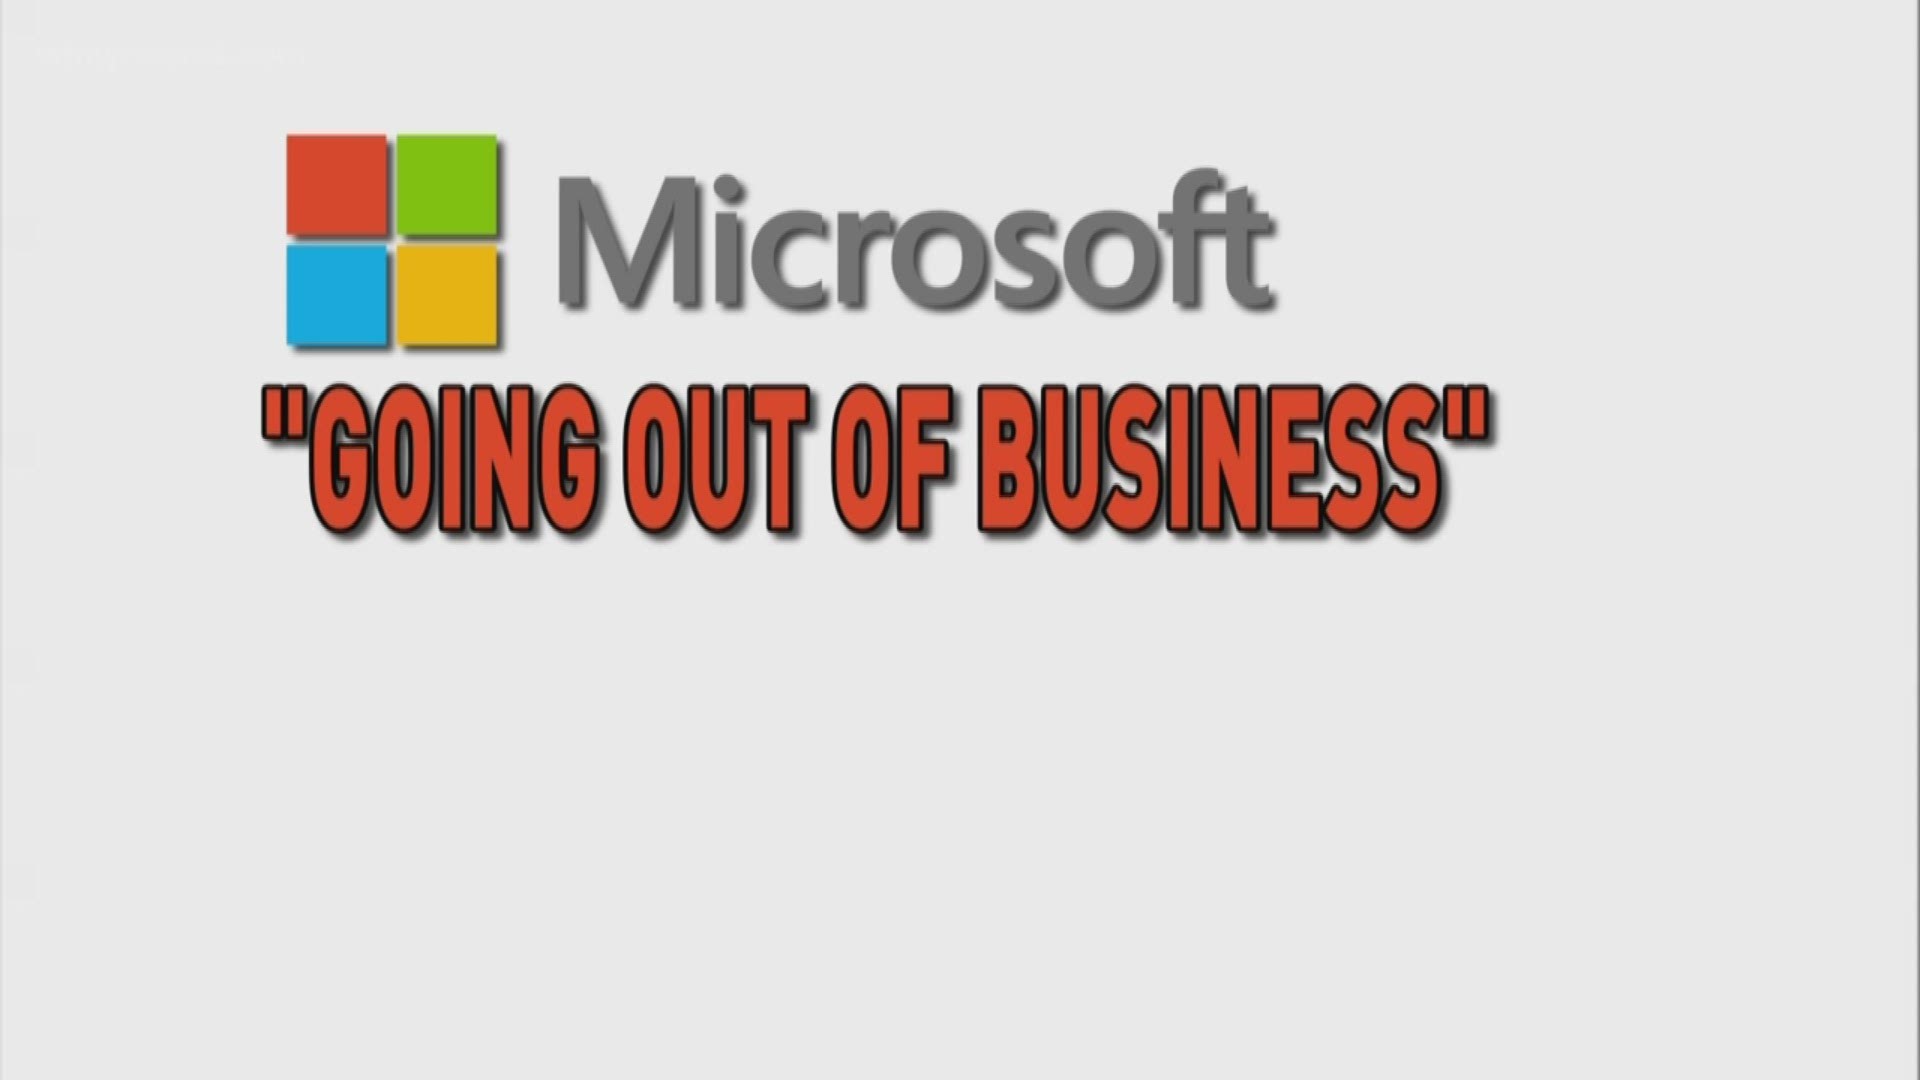 If someone calls you and says Microsoft is going out of business and they need to refund money to you, hang up the phone!